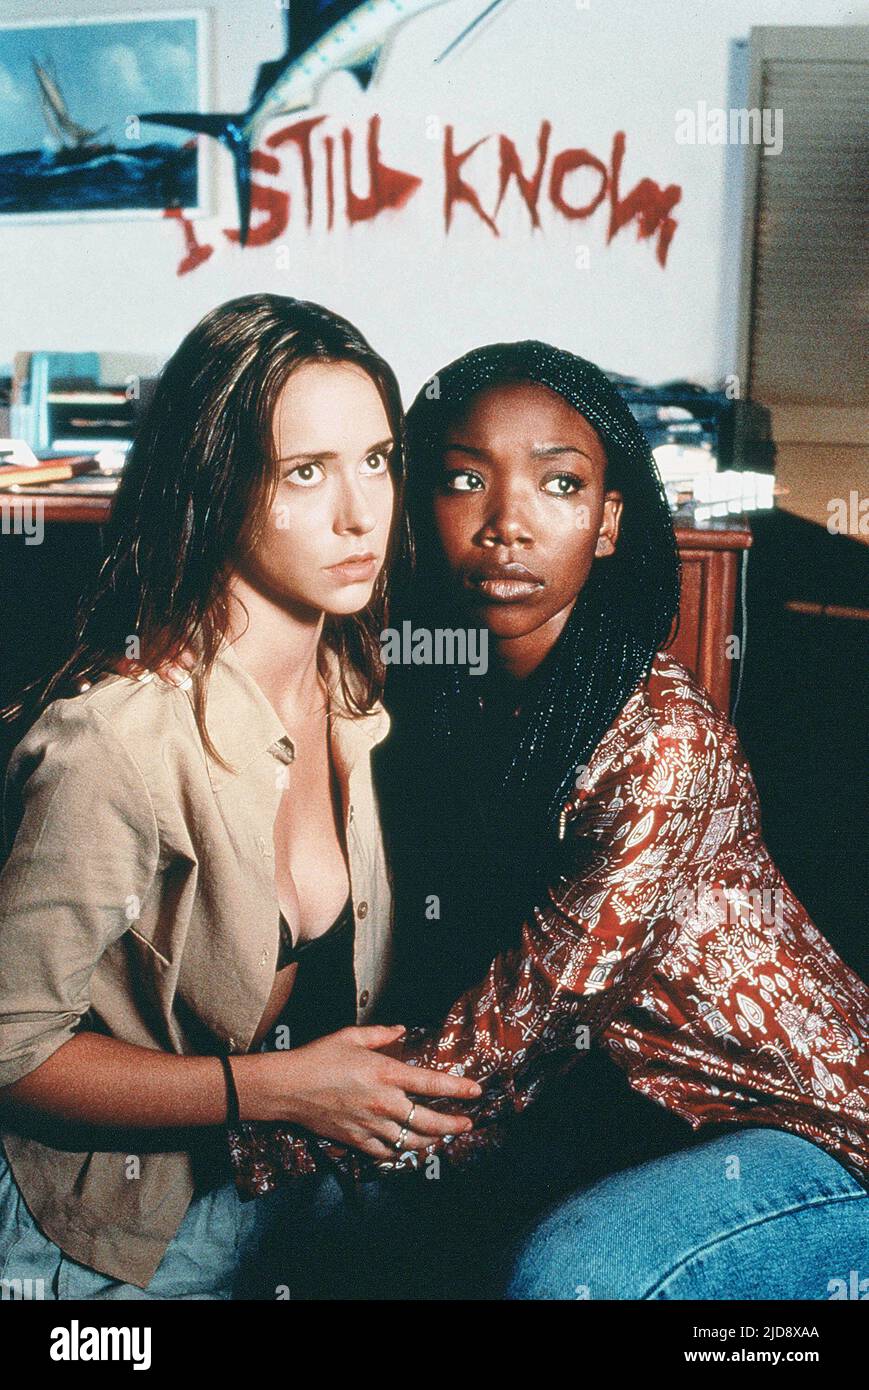 HEWITT,BRANDY, I STILL KNOW WHAT YOU DID LAST SUMMER, 1998, Stock Photo